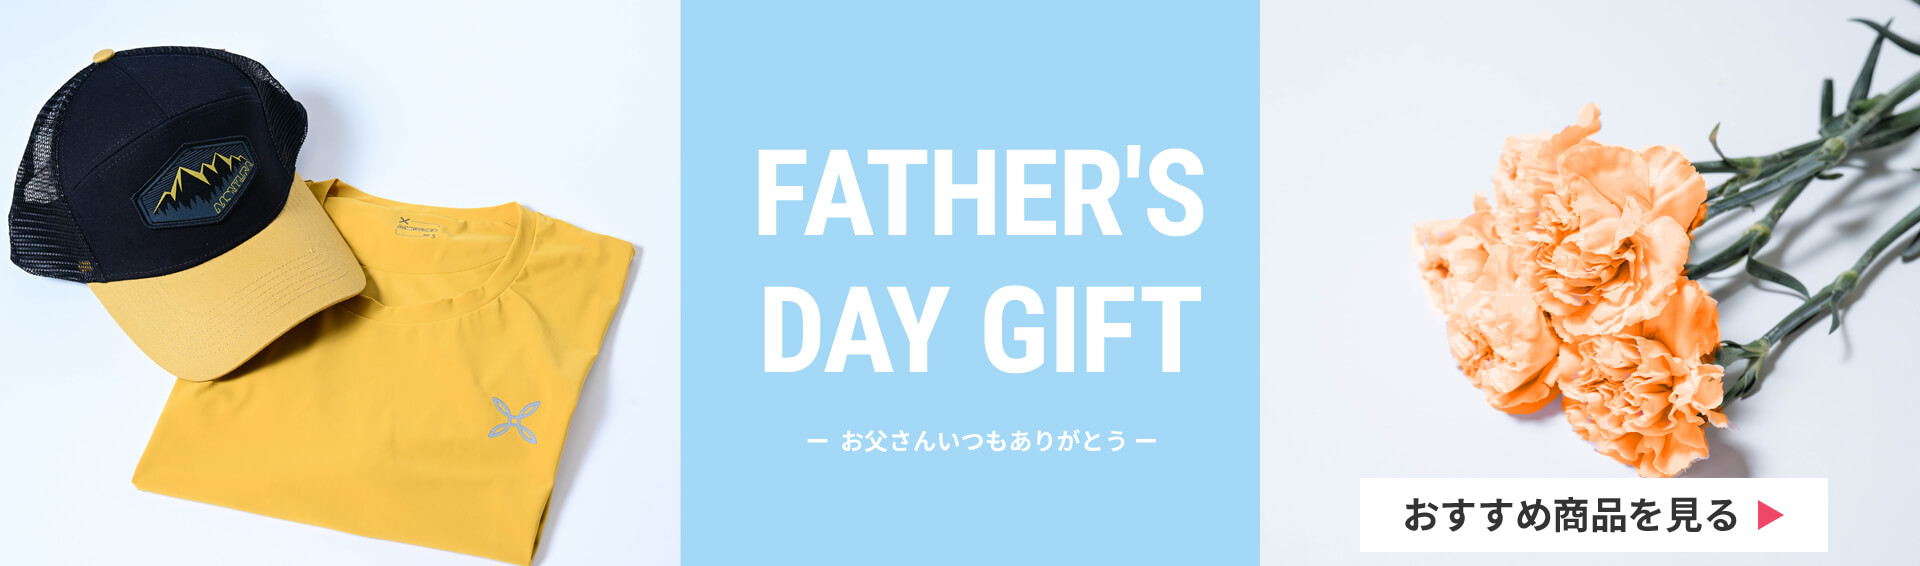 top_campaign_fathersday_pc.jpg